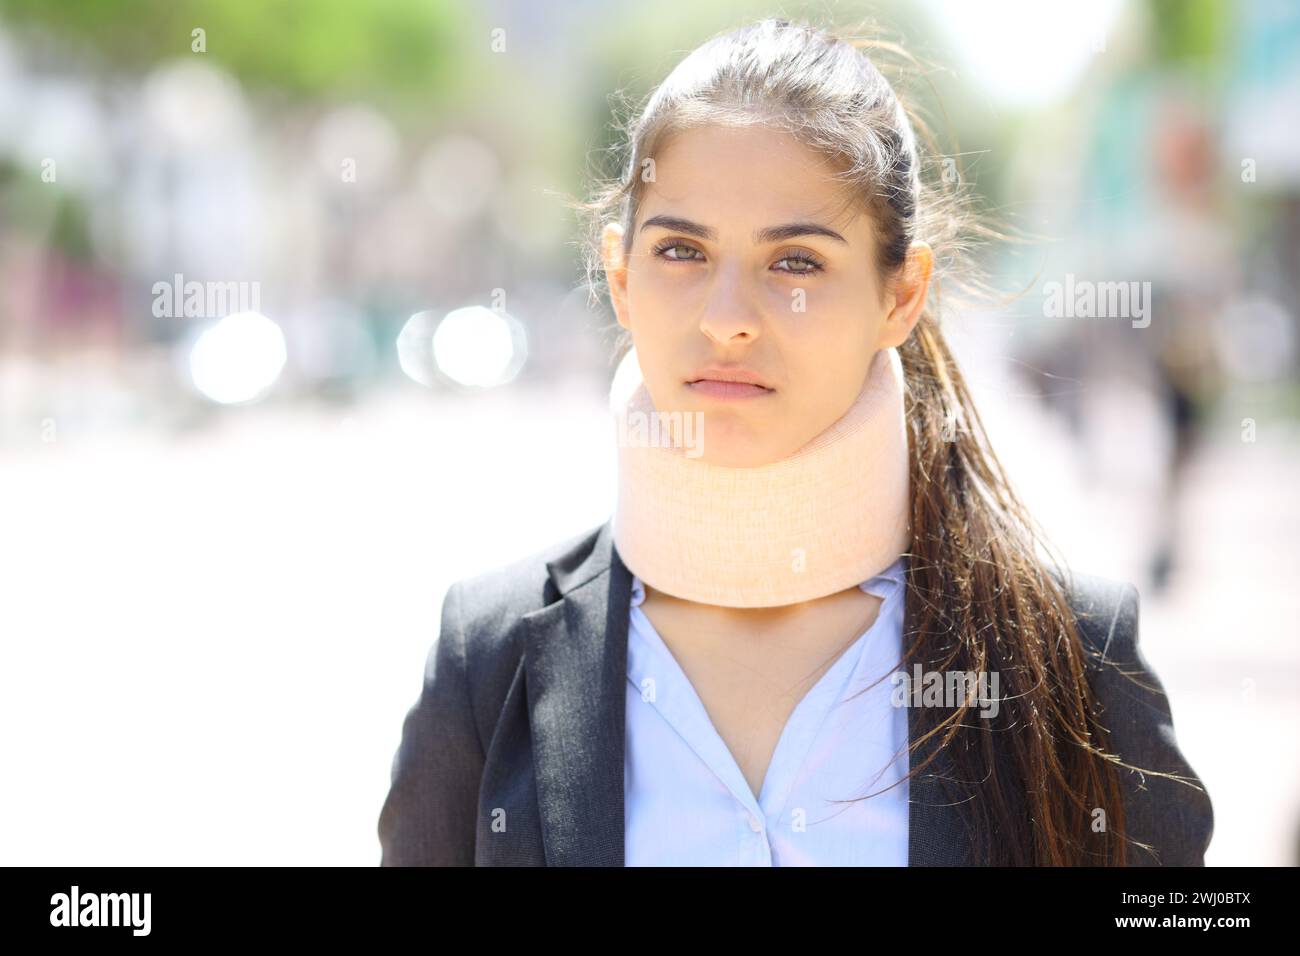 Angry convalescent businesswoman looks at you in the street Stock Photo